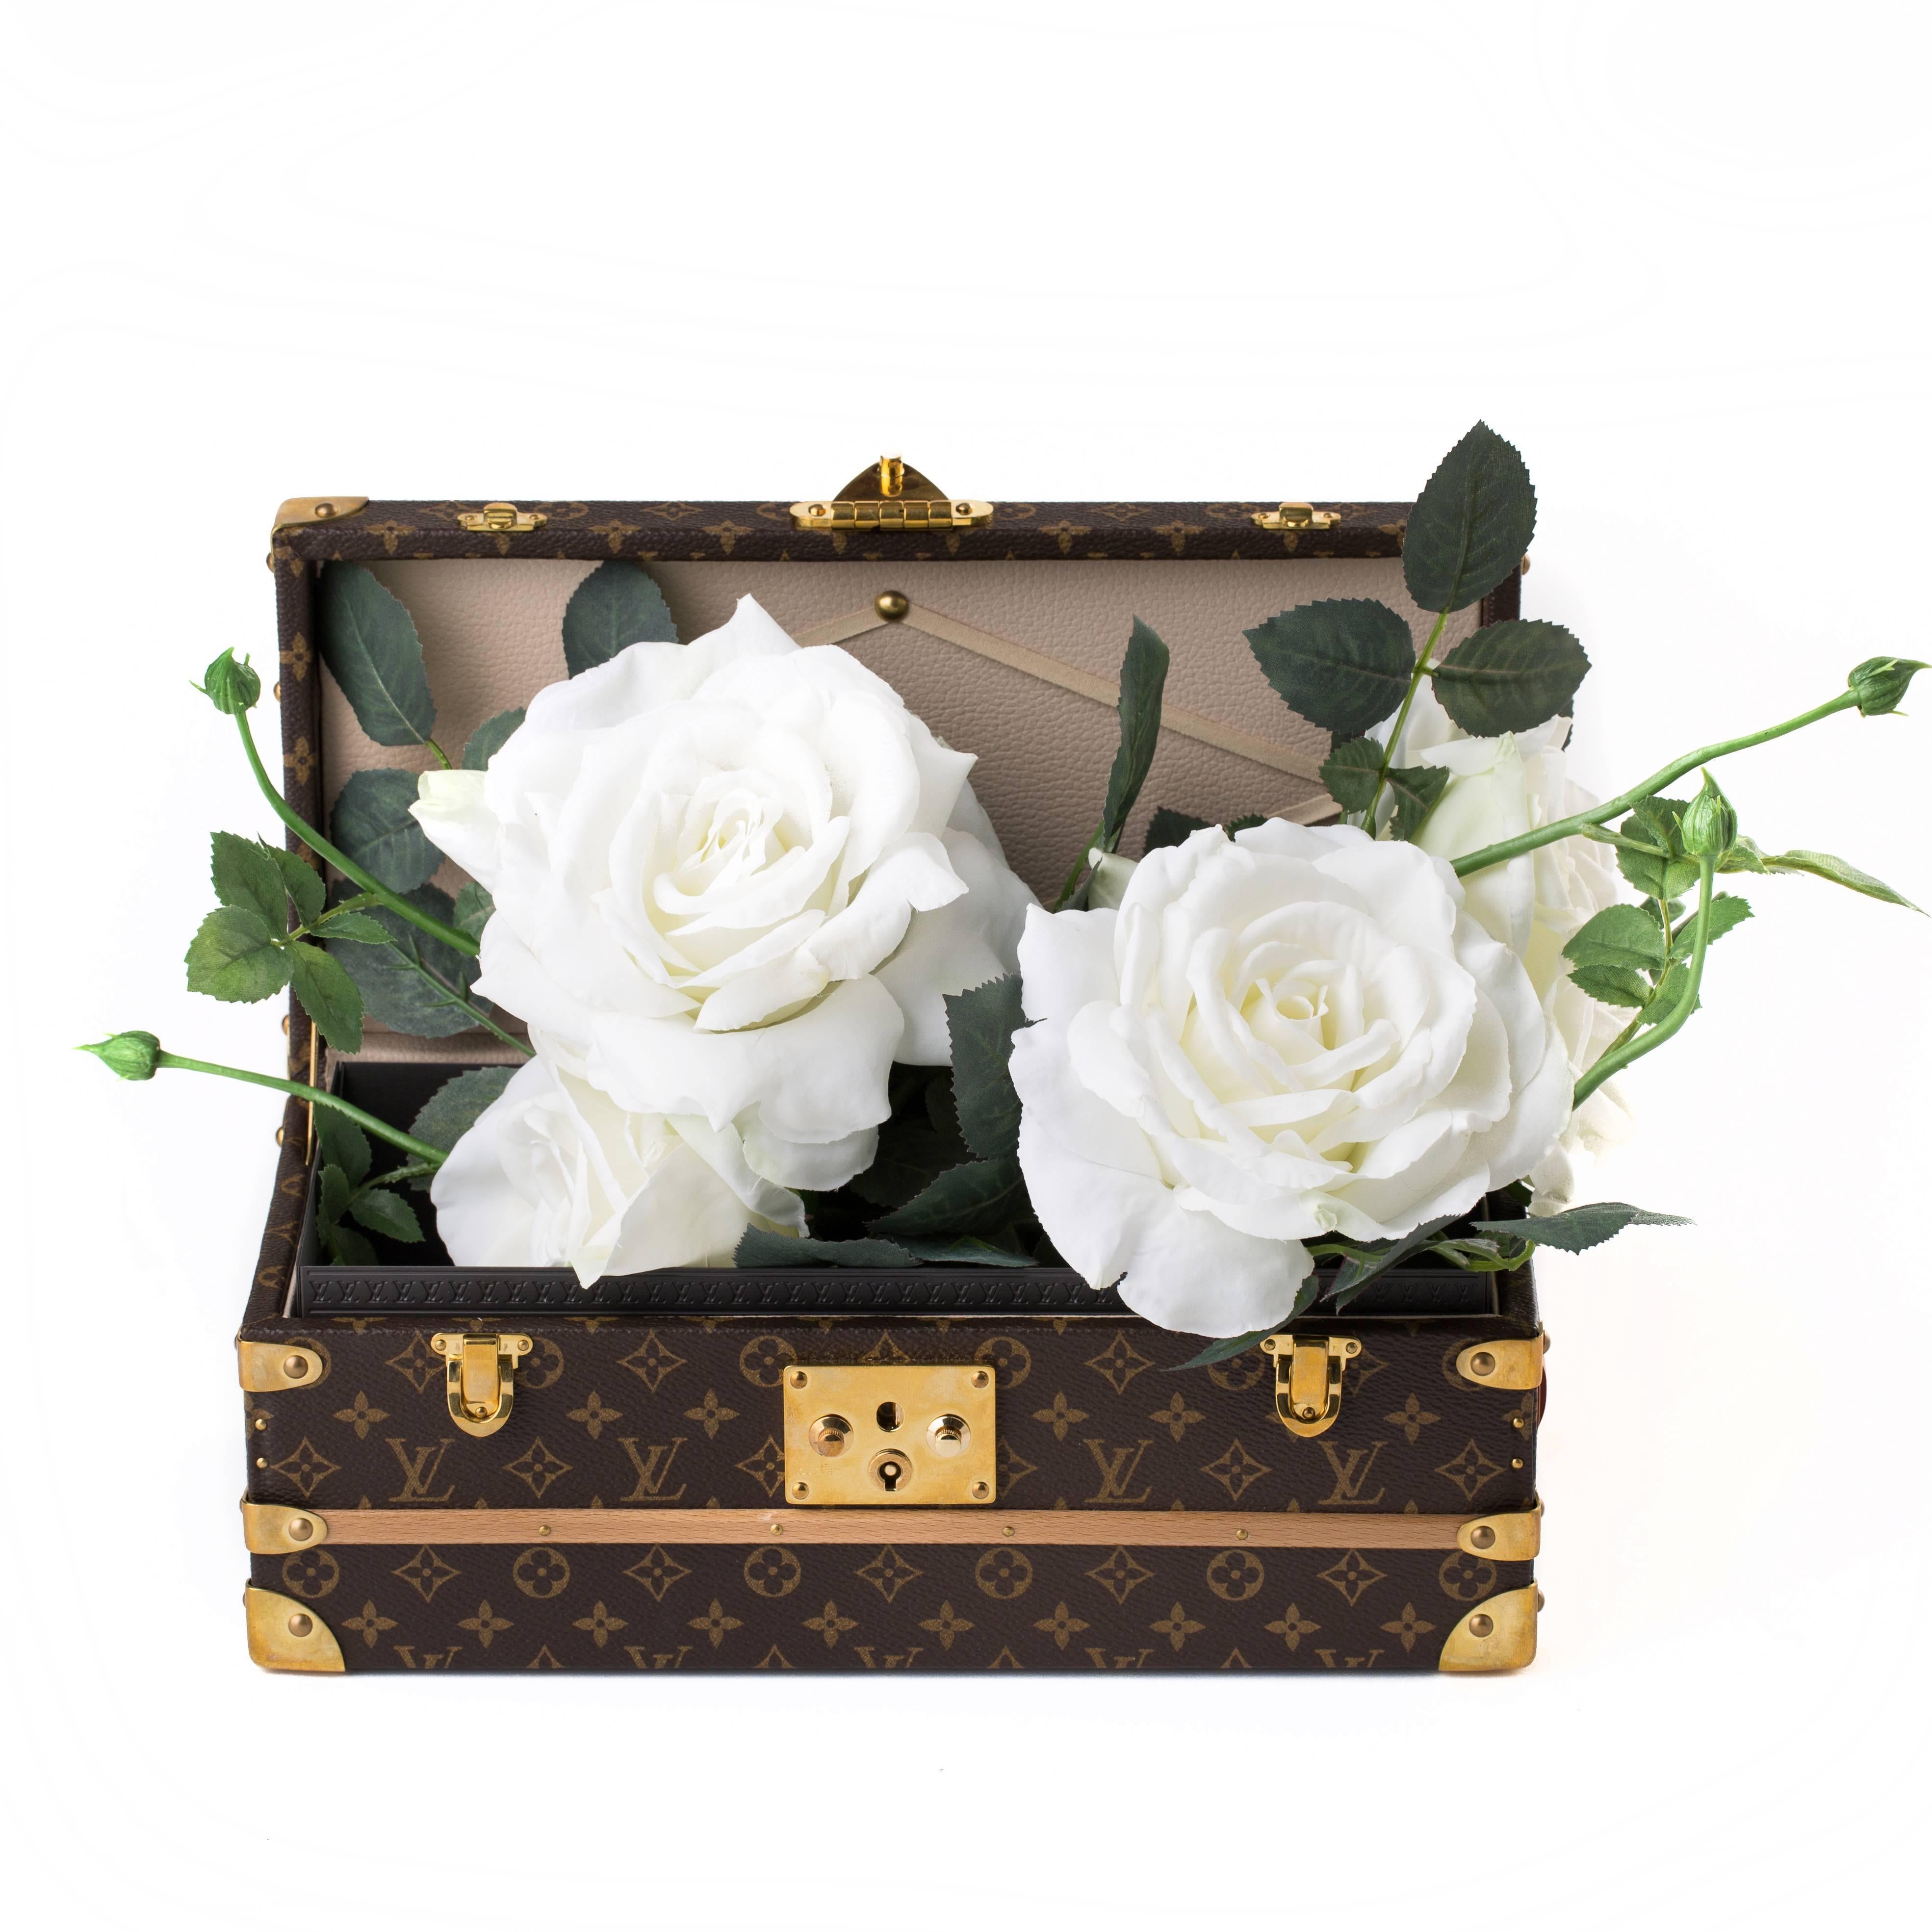 This incredible piece of craftsmanship is the perfect example of Louis Vuitton’s desire to create beautiful pieces of art. This flower trunk comes with a water resistant metallic tray which allows you to put flowers, water or soil in the tray